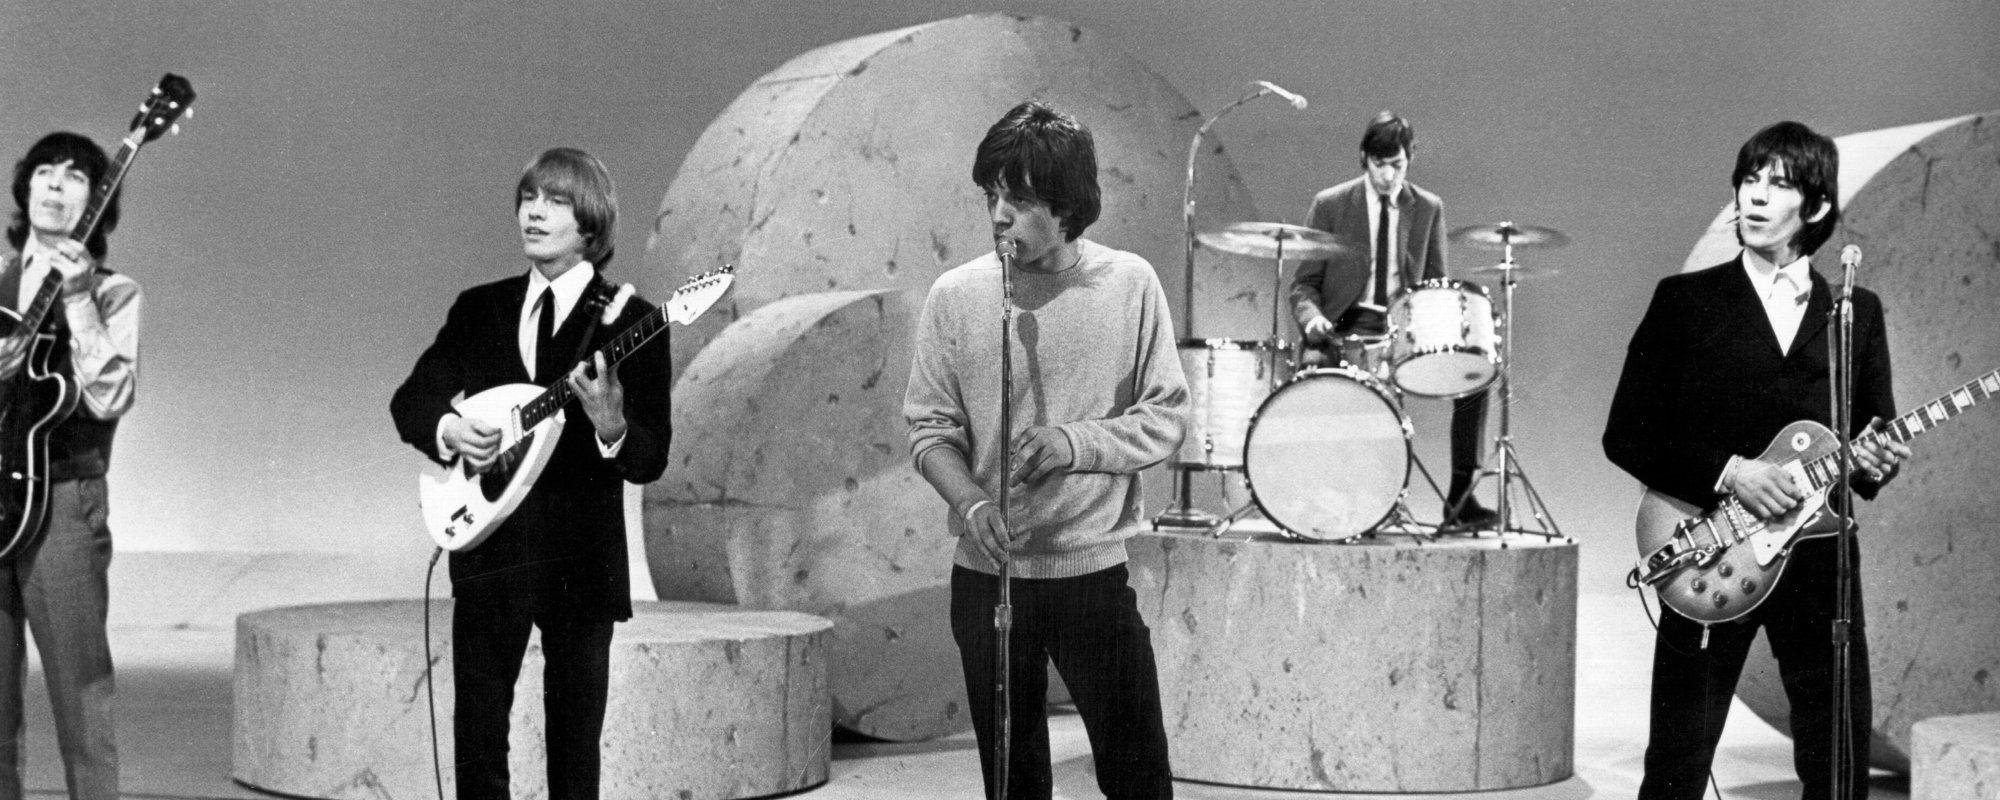 We Asked A.I. to Rewrite the "Sympathy for the Devil" by the Rolling Stones – Take a Look at the Result